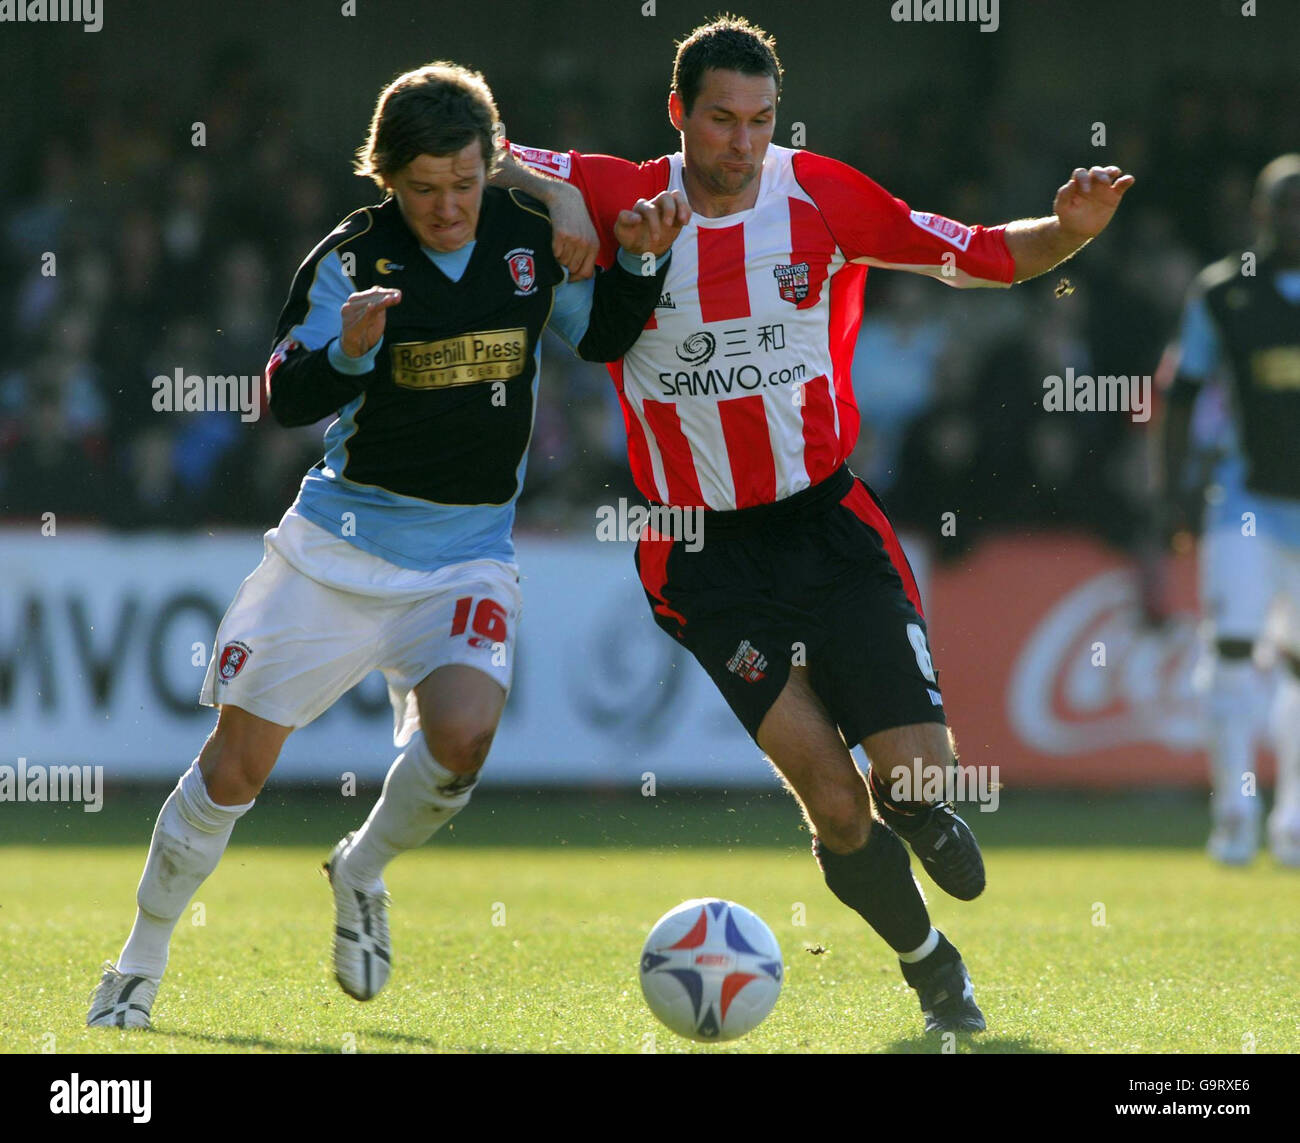 Brentford's Scott Taylor (right) and Rotherham's Stephen Brogan battle for the ball during the Coca-Cola Football League One match at Griffin Park, Brentford. Stock Photo